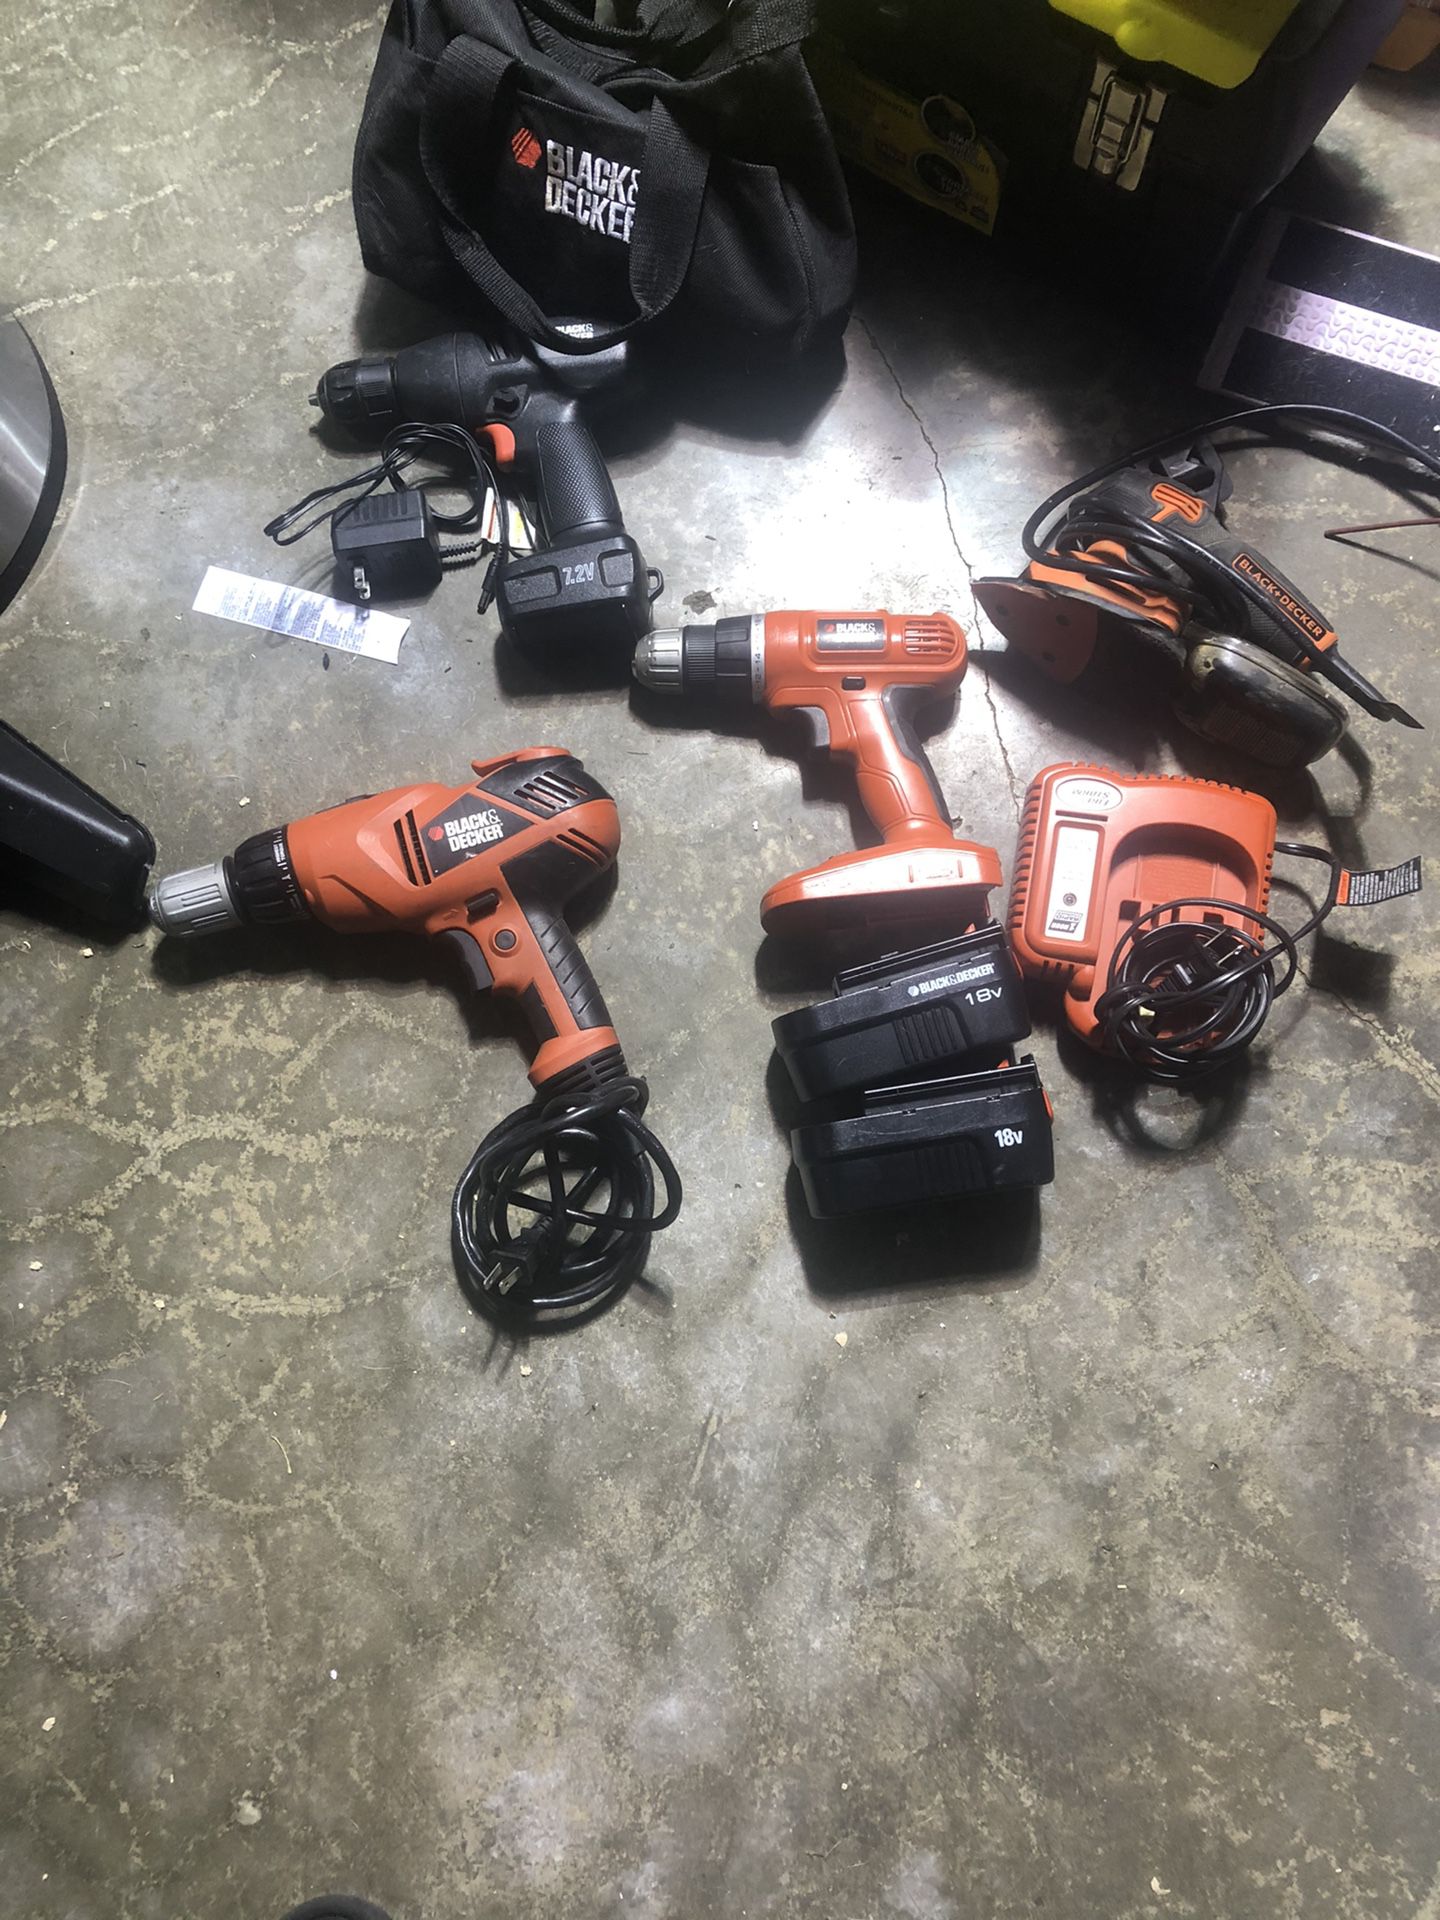 Black and Decker Drills and Sander